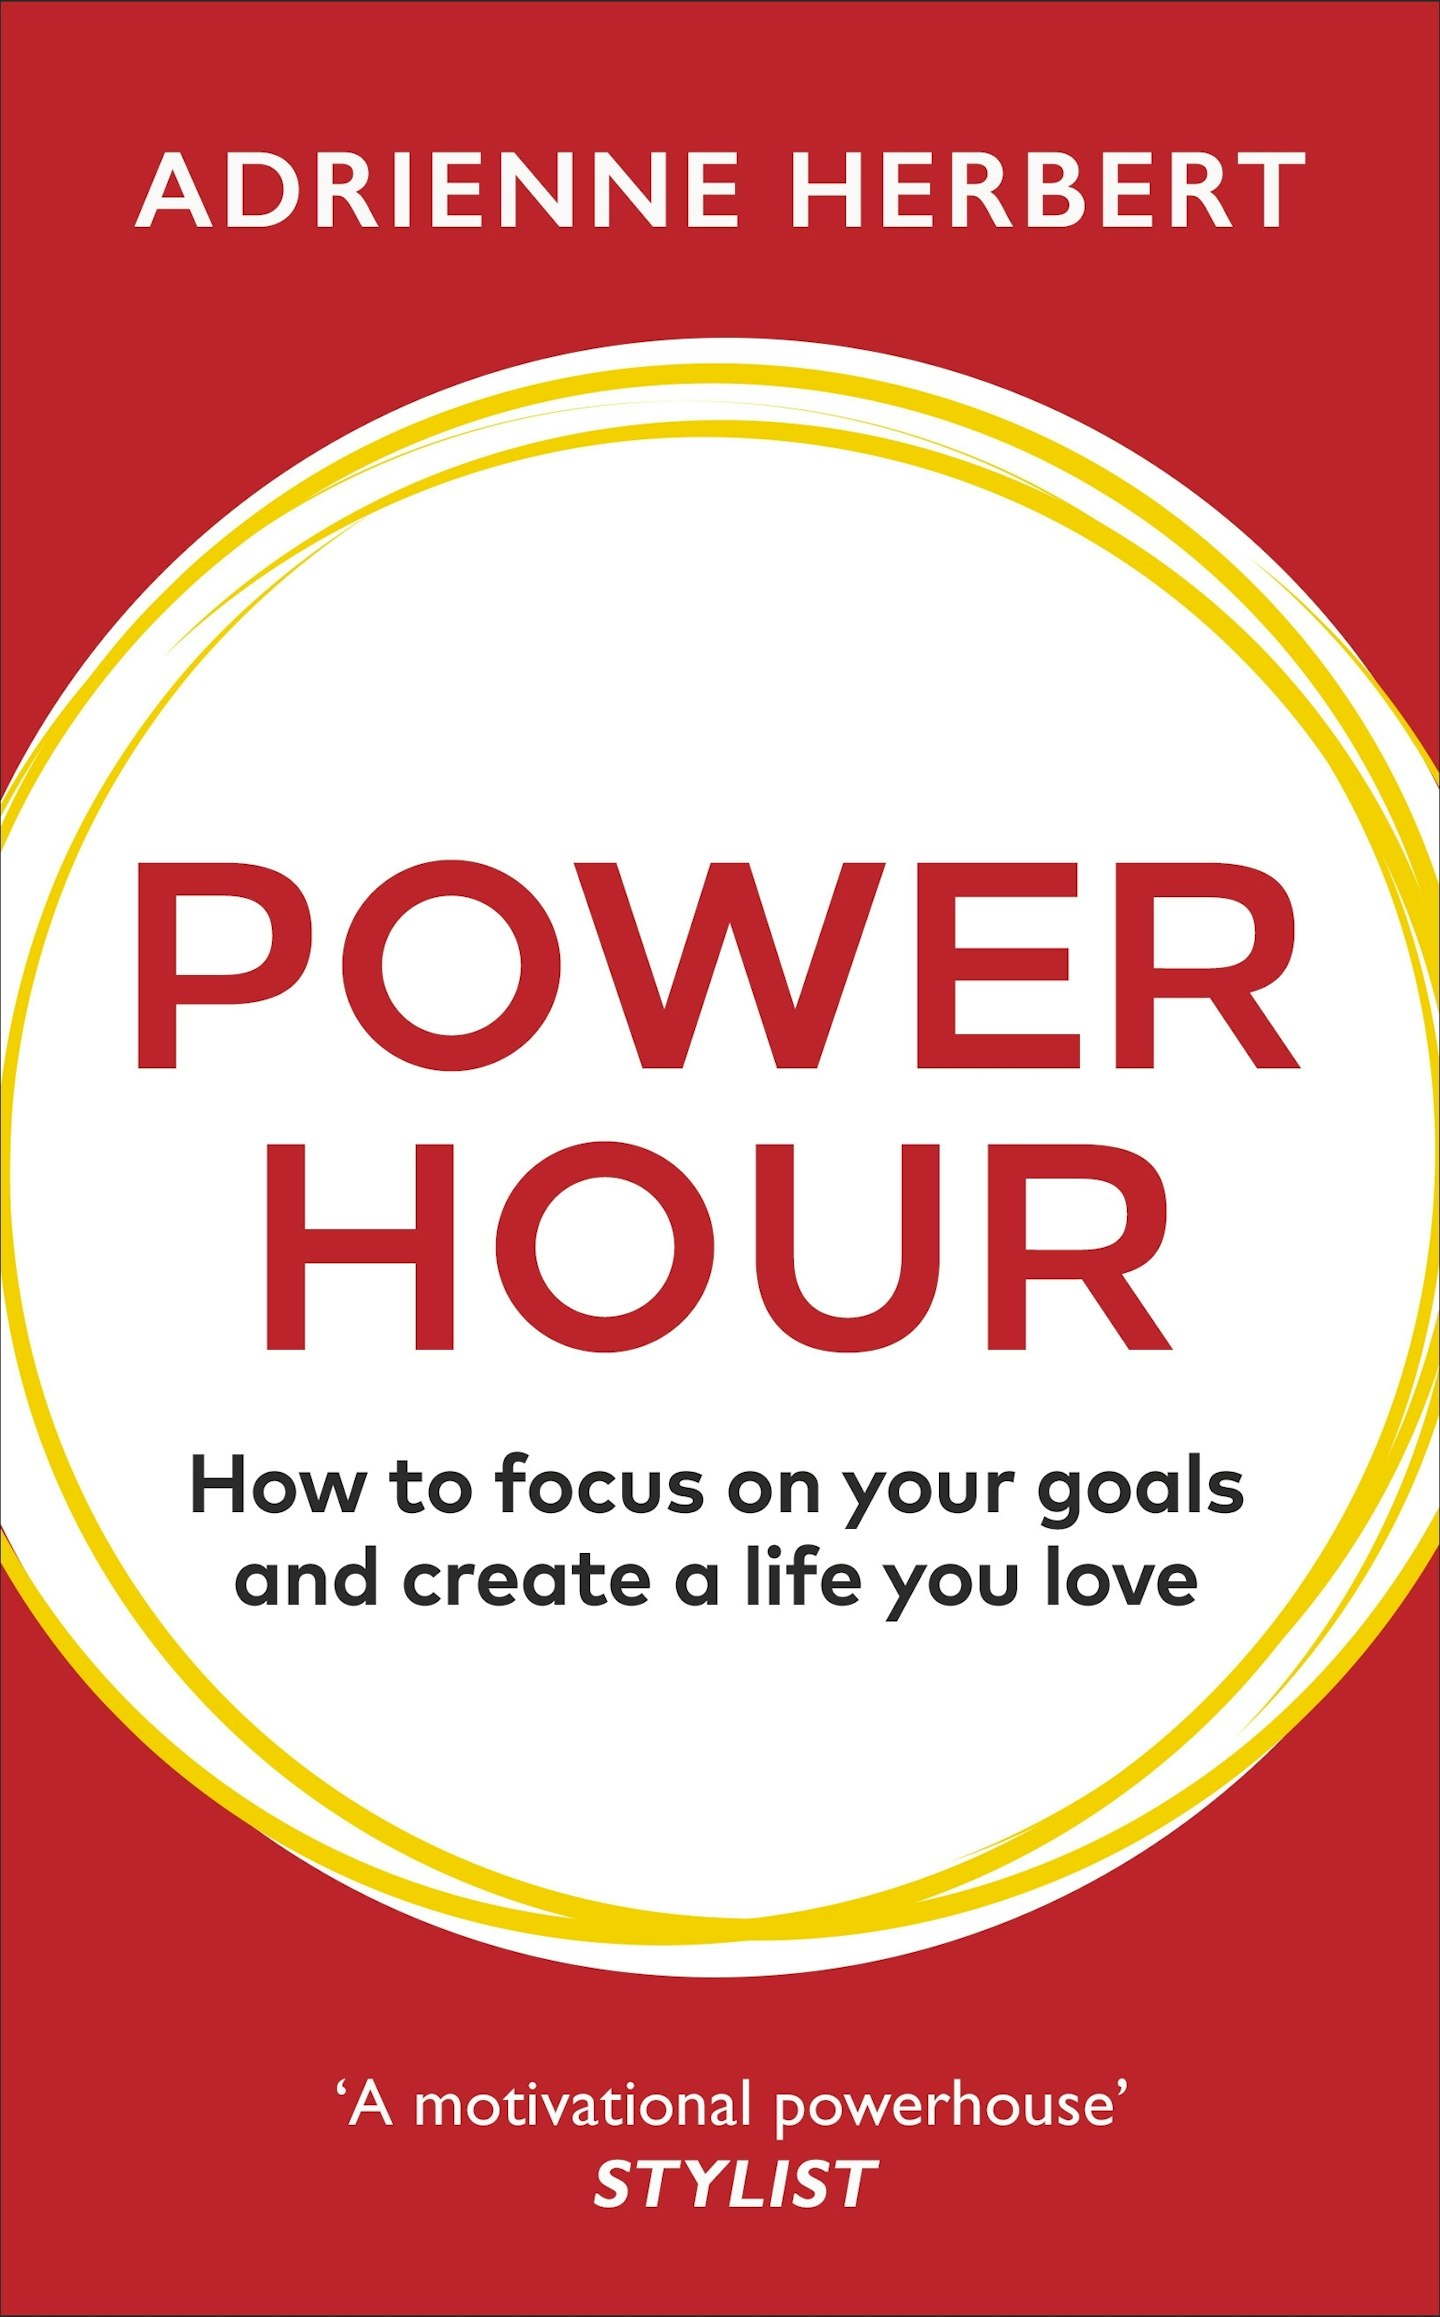 Power Hour: How to Focus on Your Goals and Create a Life You Love, by Adrienne Herbert